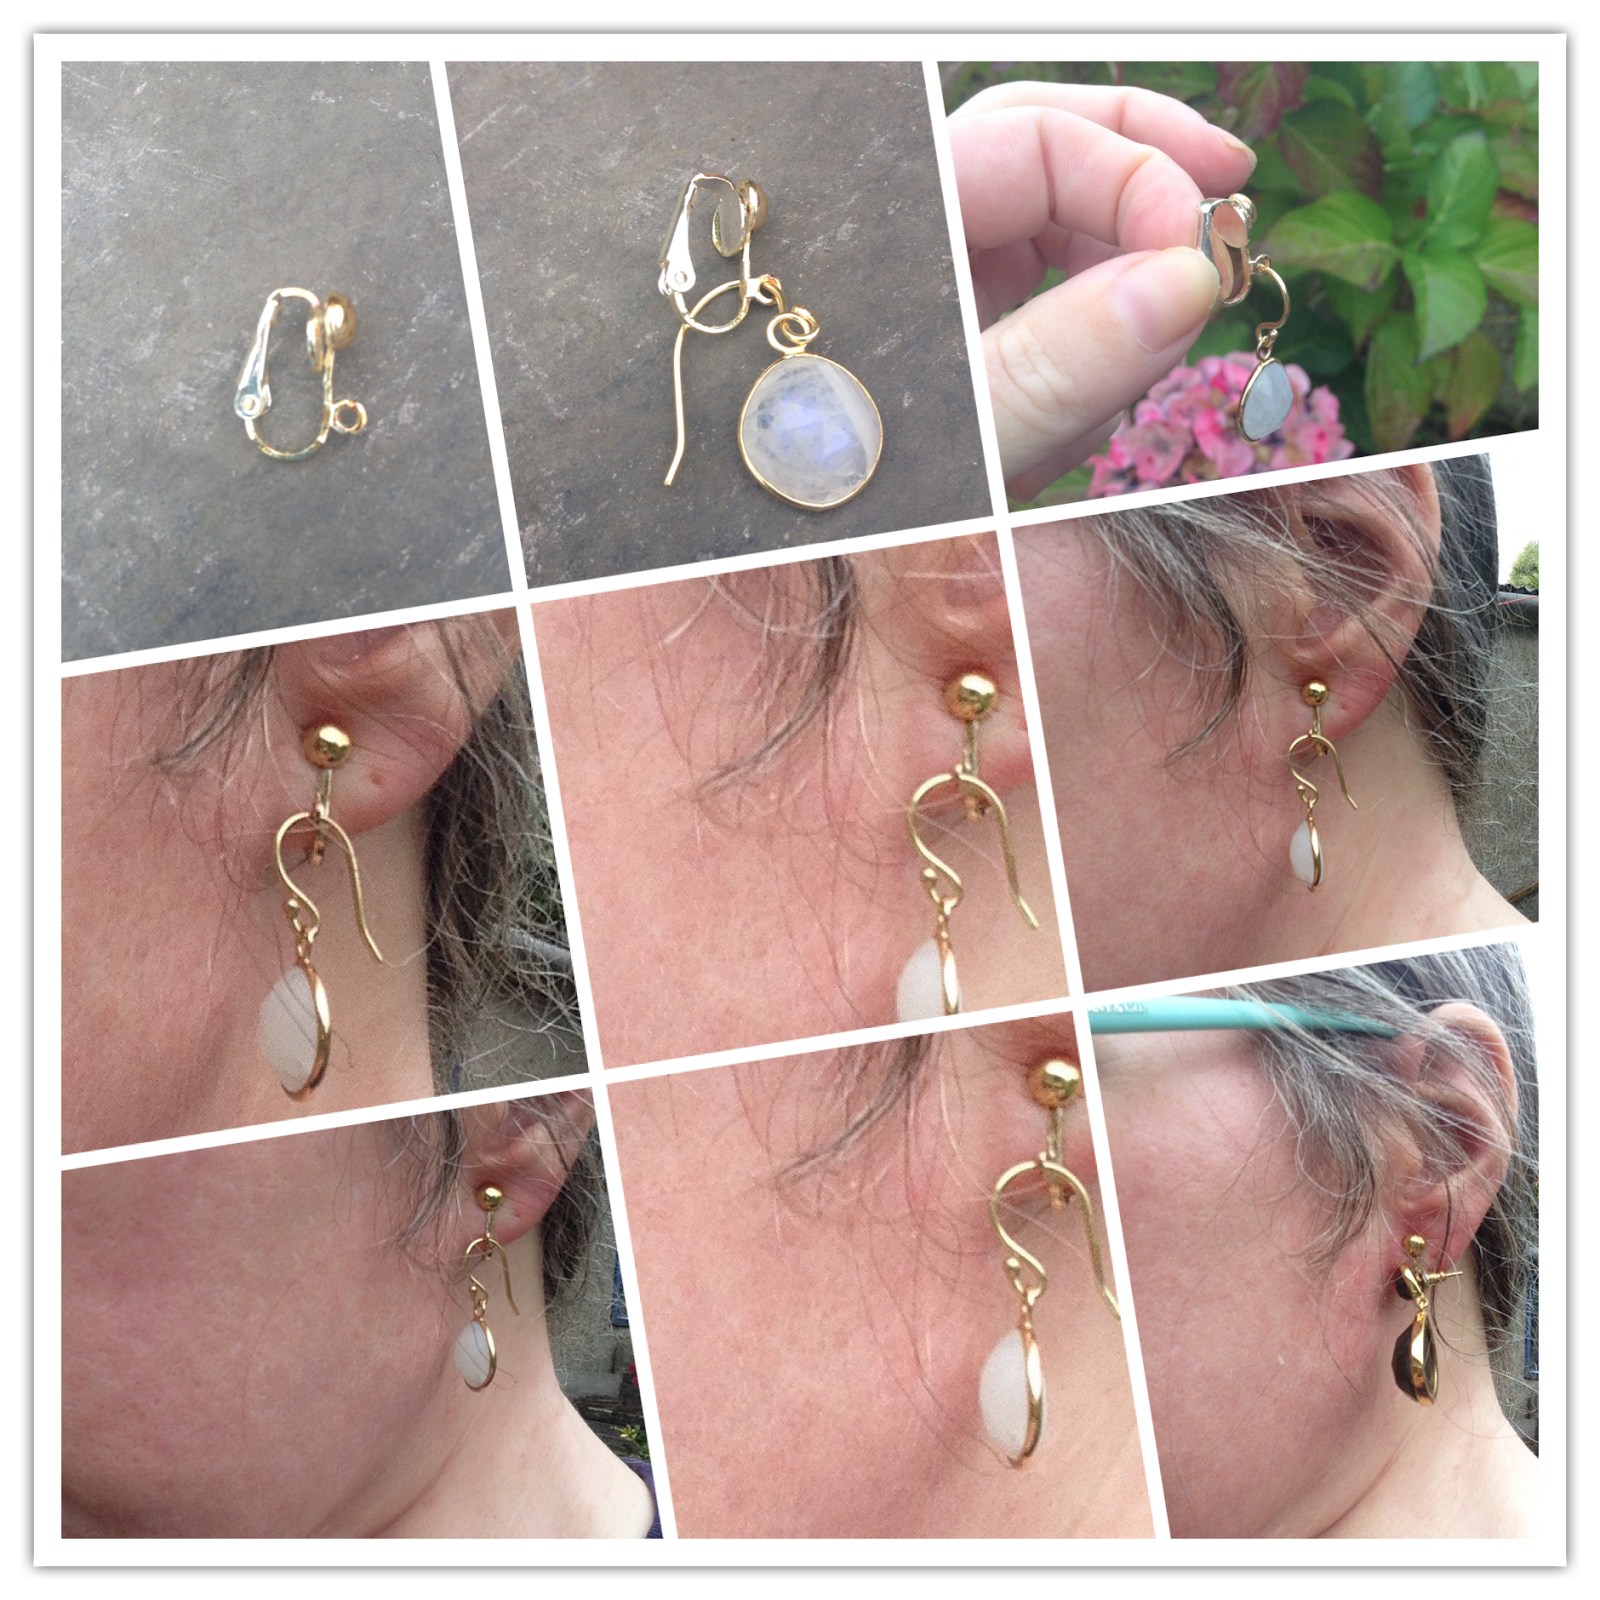 DIY Tips to Convert Pierced Earrings to Clip-Ons